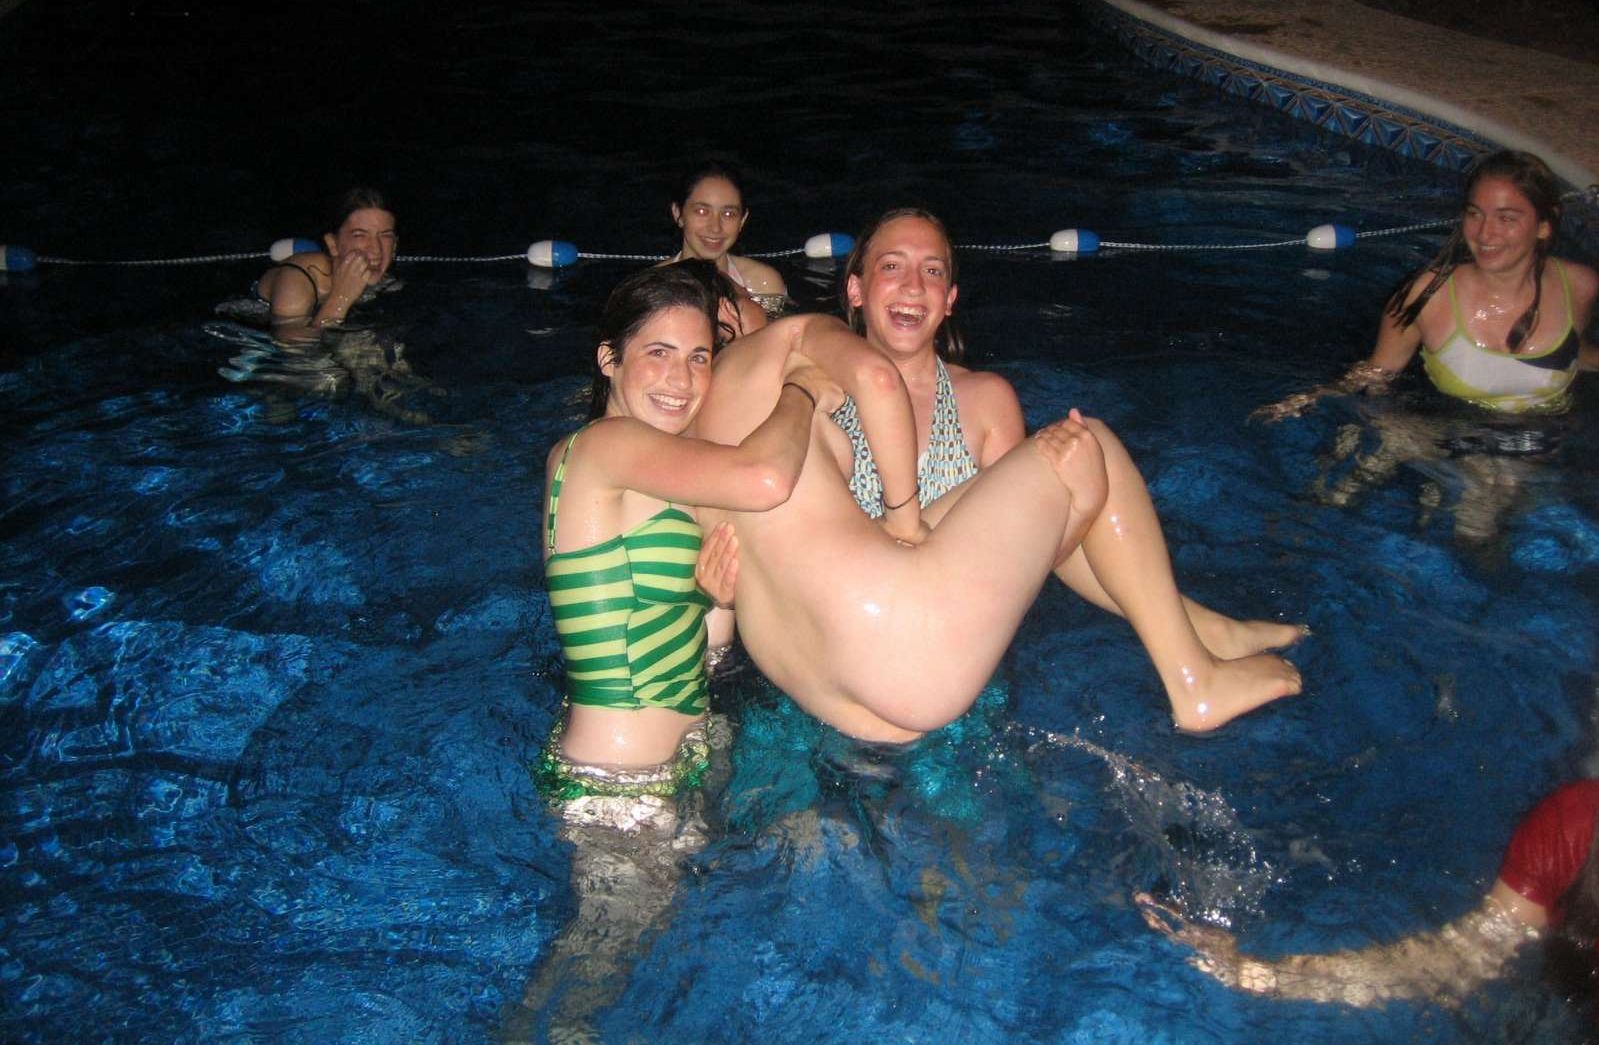 Candid Teen Pool Bobs And Vagene